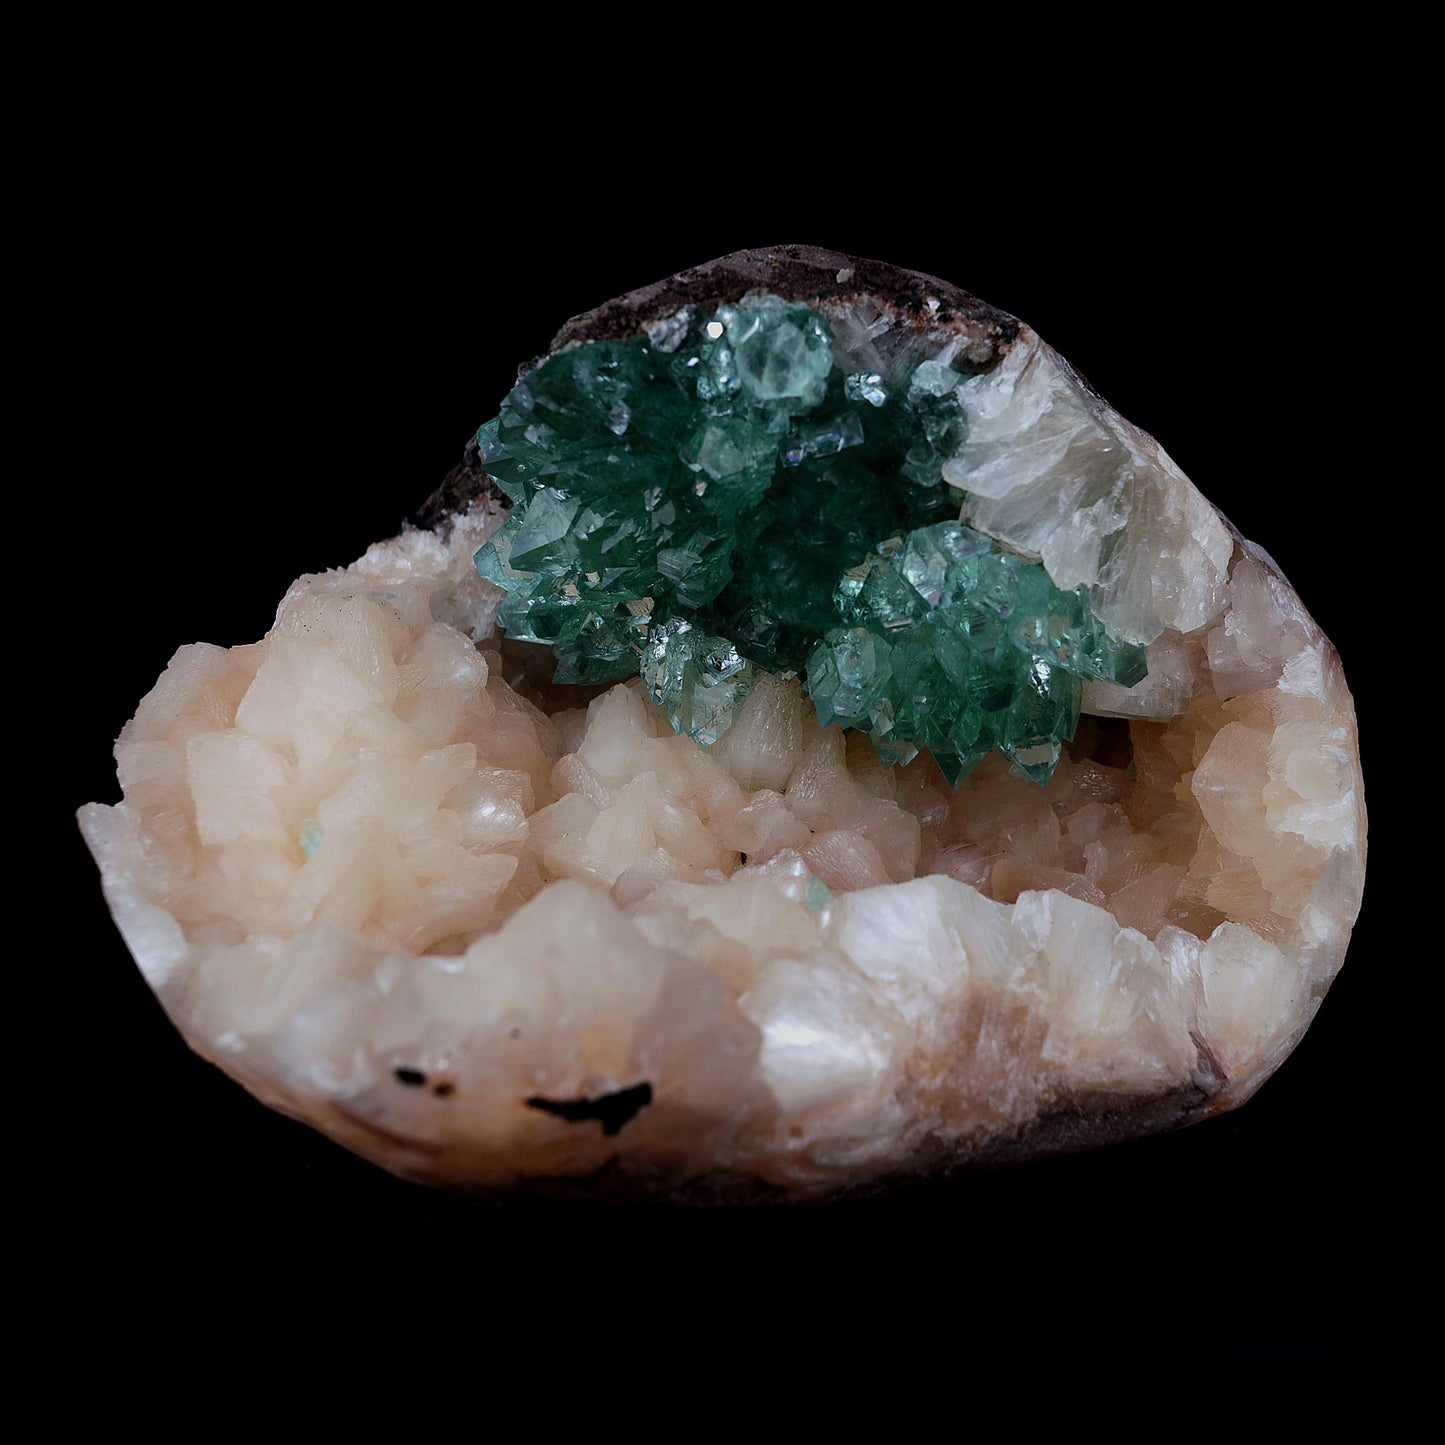 Green Apophyllite with Stilbite Natural Mineral Specimen # B 3986  https://www.superbminerals.us/products/green-apophyllite-with-stilbite-natural-mineral-specimen-b-3986  Features Transparent green apophyllite crystals up to 10-15 mm long with lustrous crystal faces and steep pyramidal terminations, on matrix covered with lustrous peach-baggie colored Stilbite crystals up to mixed size. Primary Mineral(s):&nbsp; Apophyllite Secondary Mineral(s): Stilbite